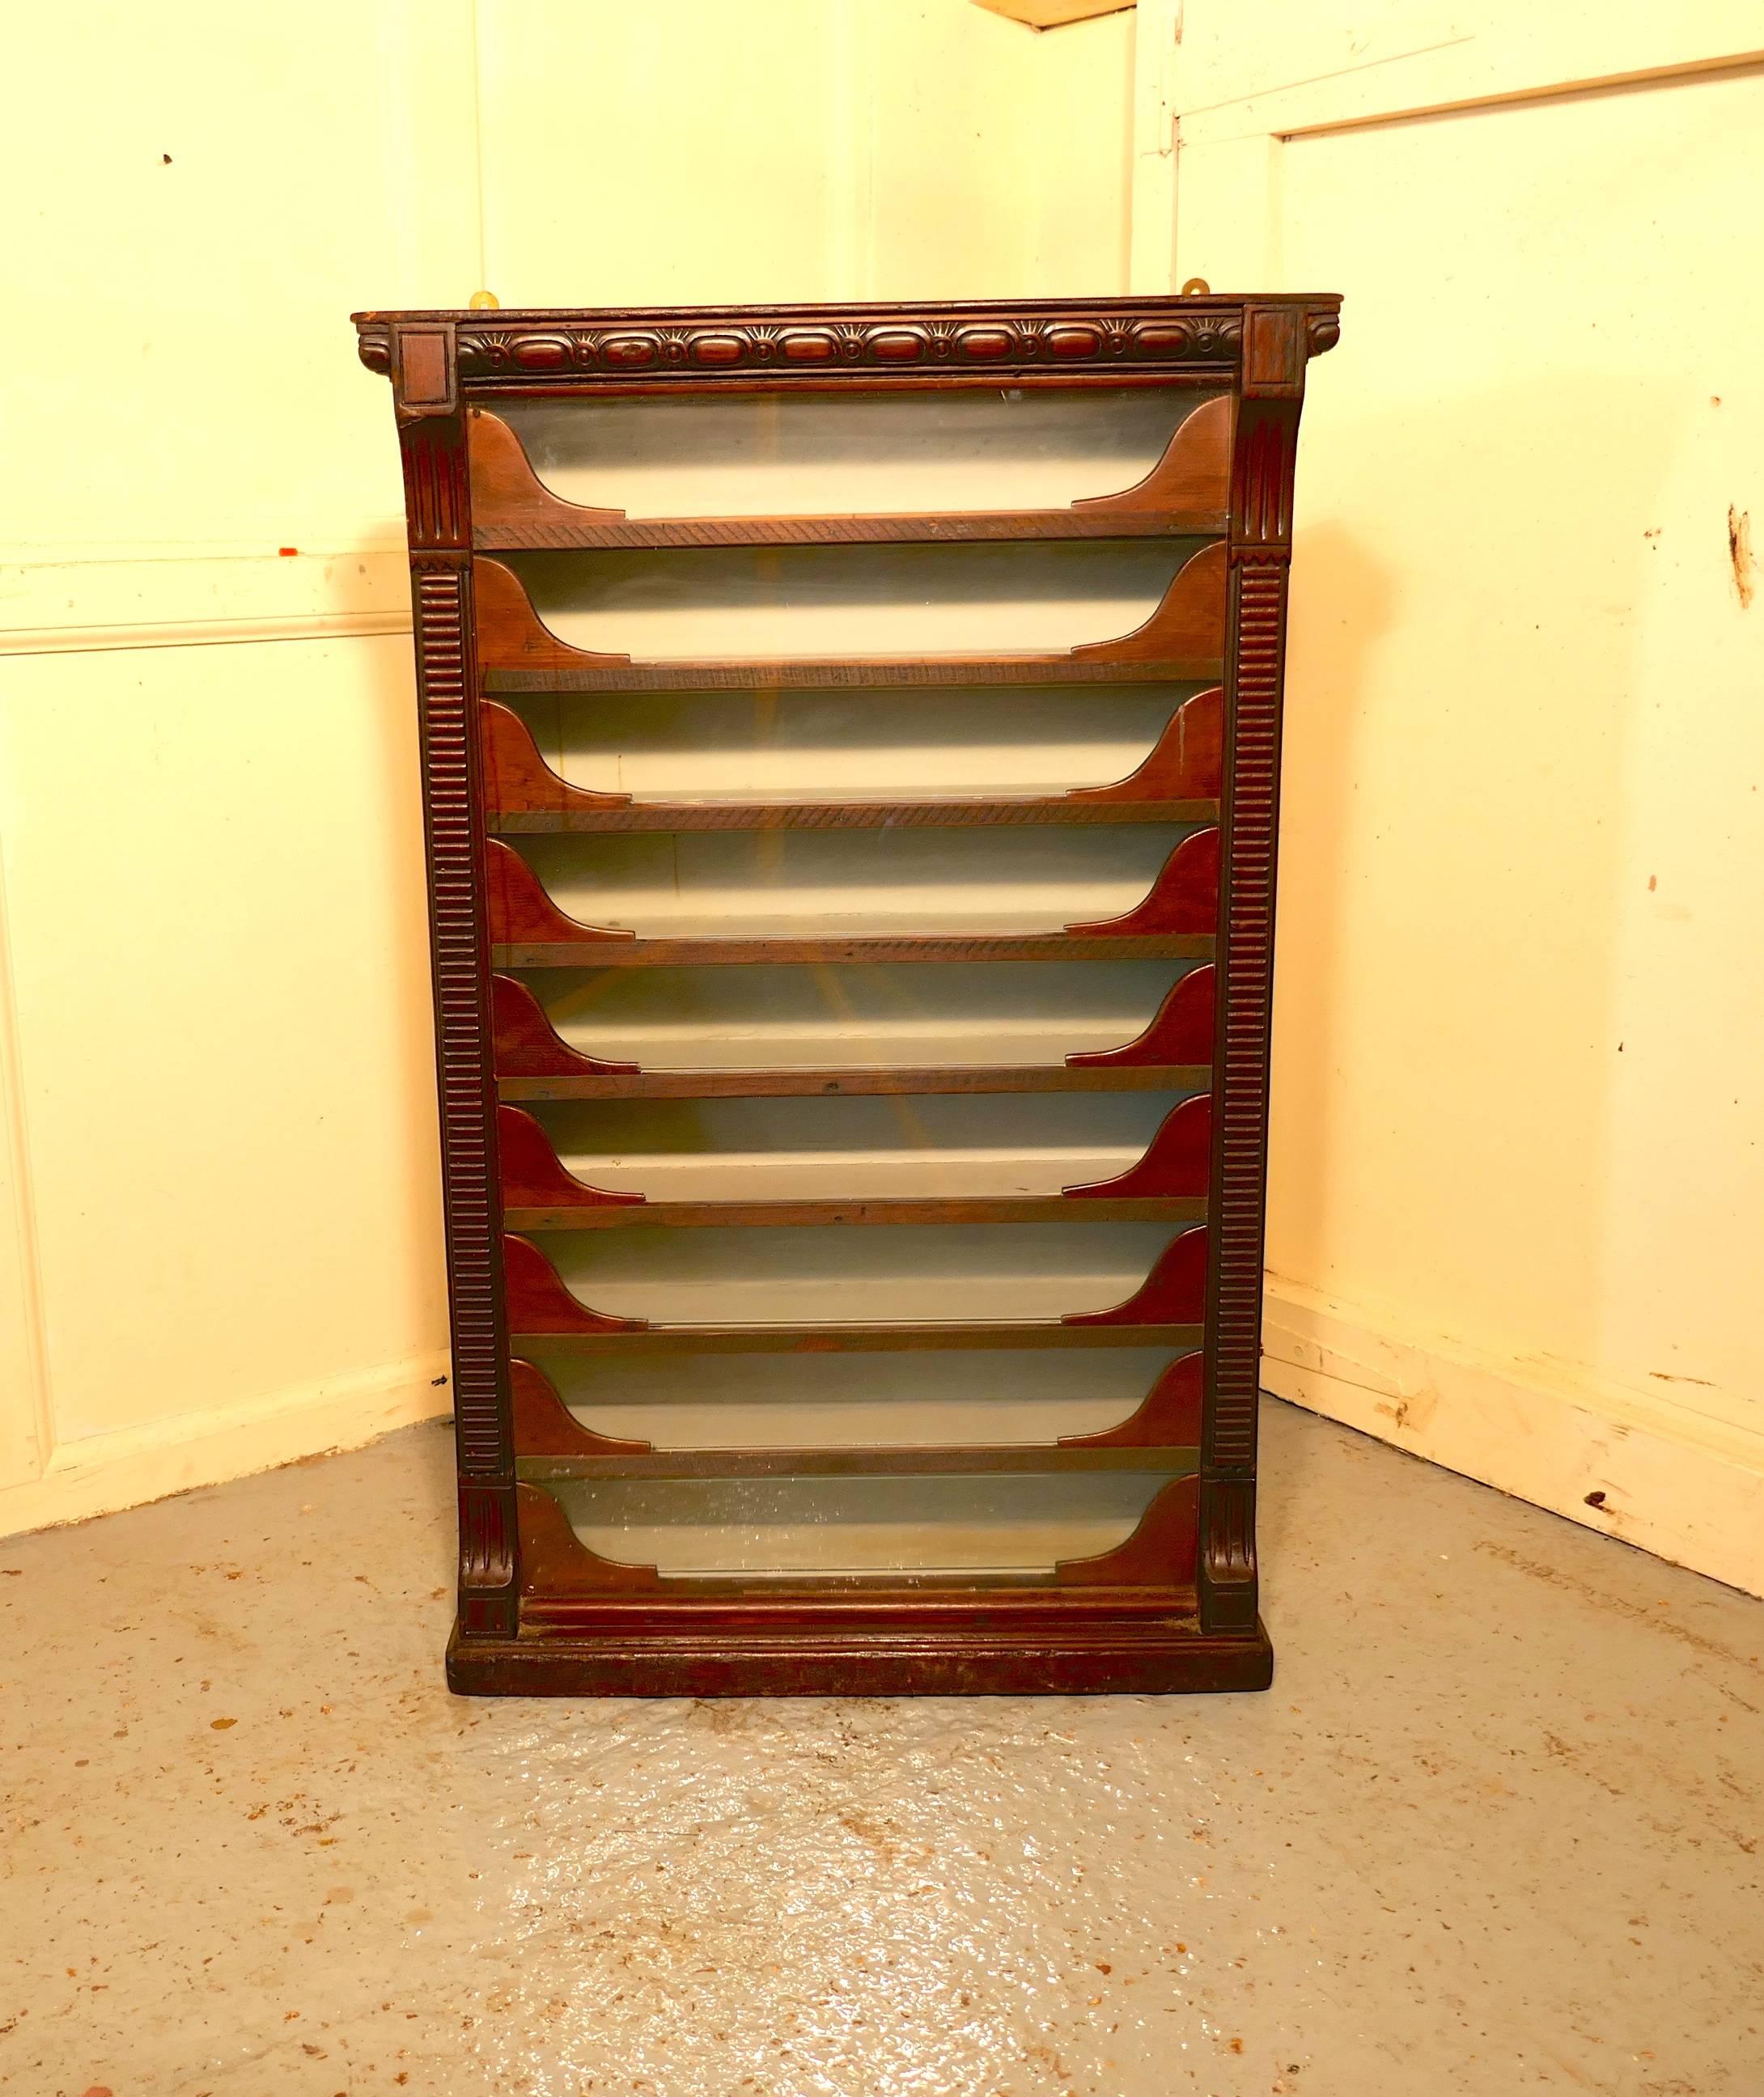 19th Century 9 Drawer Cigarette Cabinet, by Stephen Mitchell and Sons of Glasgow

This is a really interesting piece of Social History, the cabinet like so many others was supplied by the Tobacco manufacturers to the retail trade. 
The cabinet is